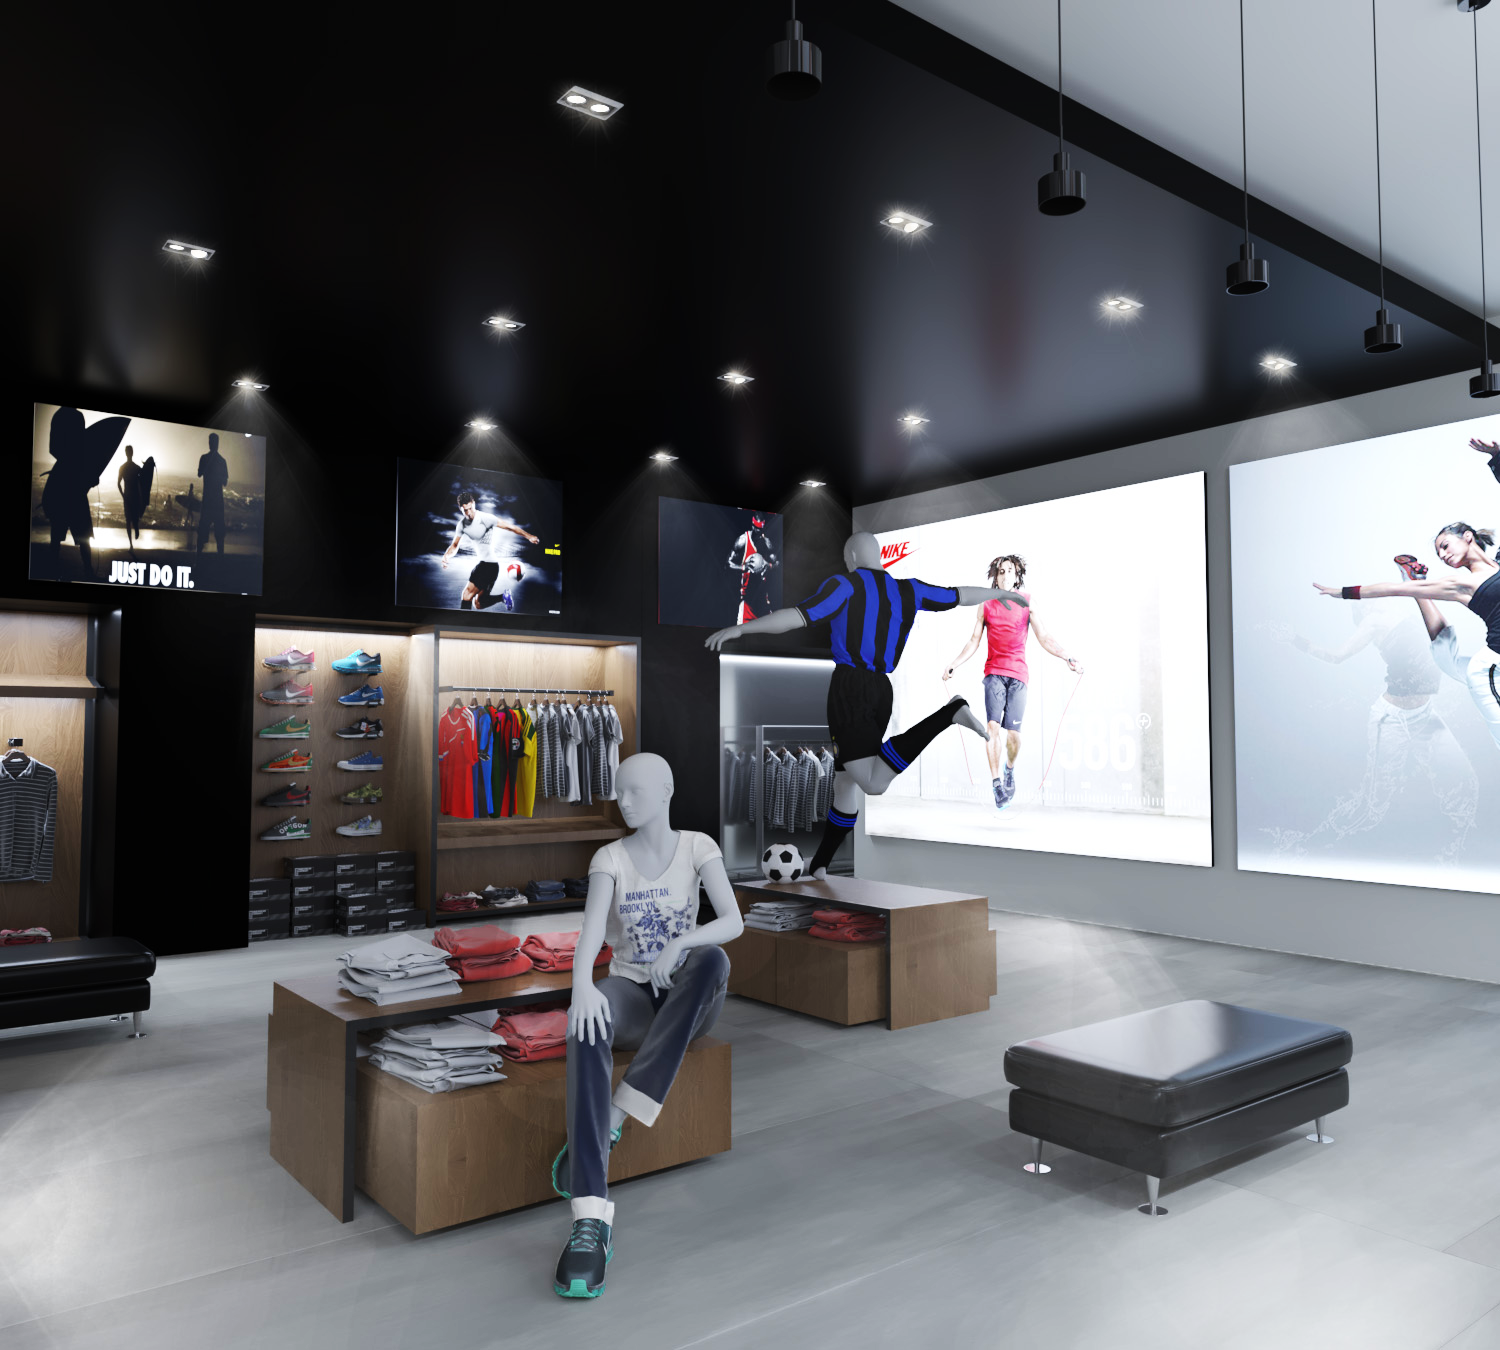 Design of a sporting goods store